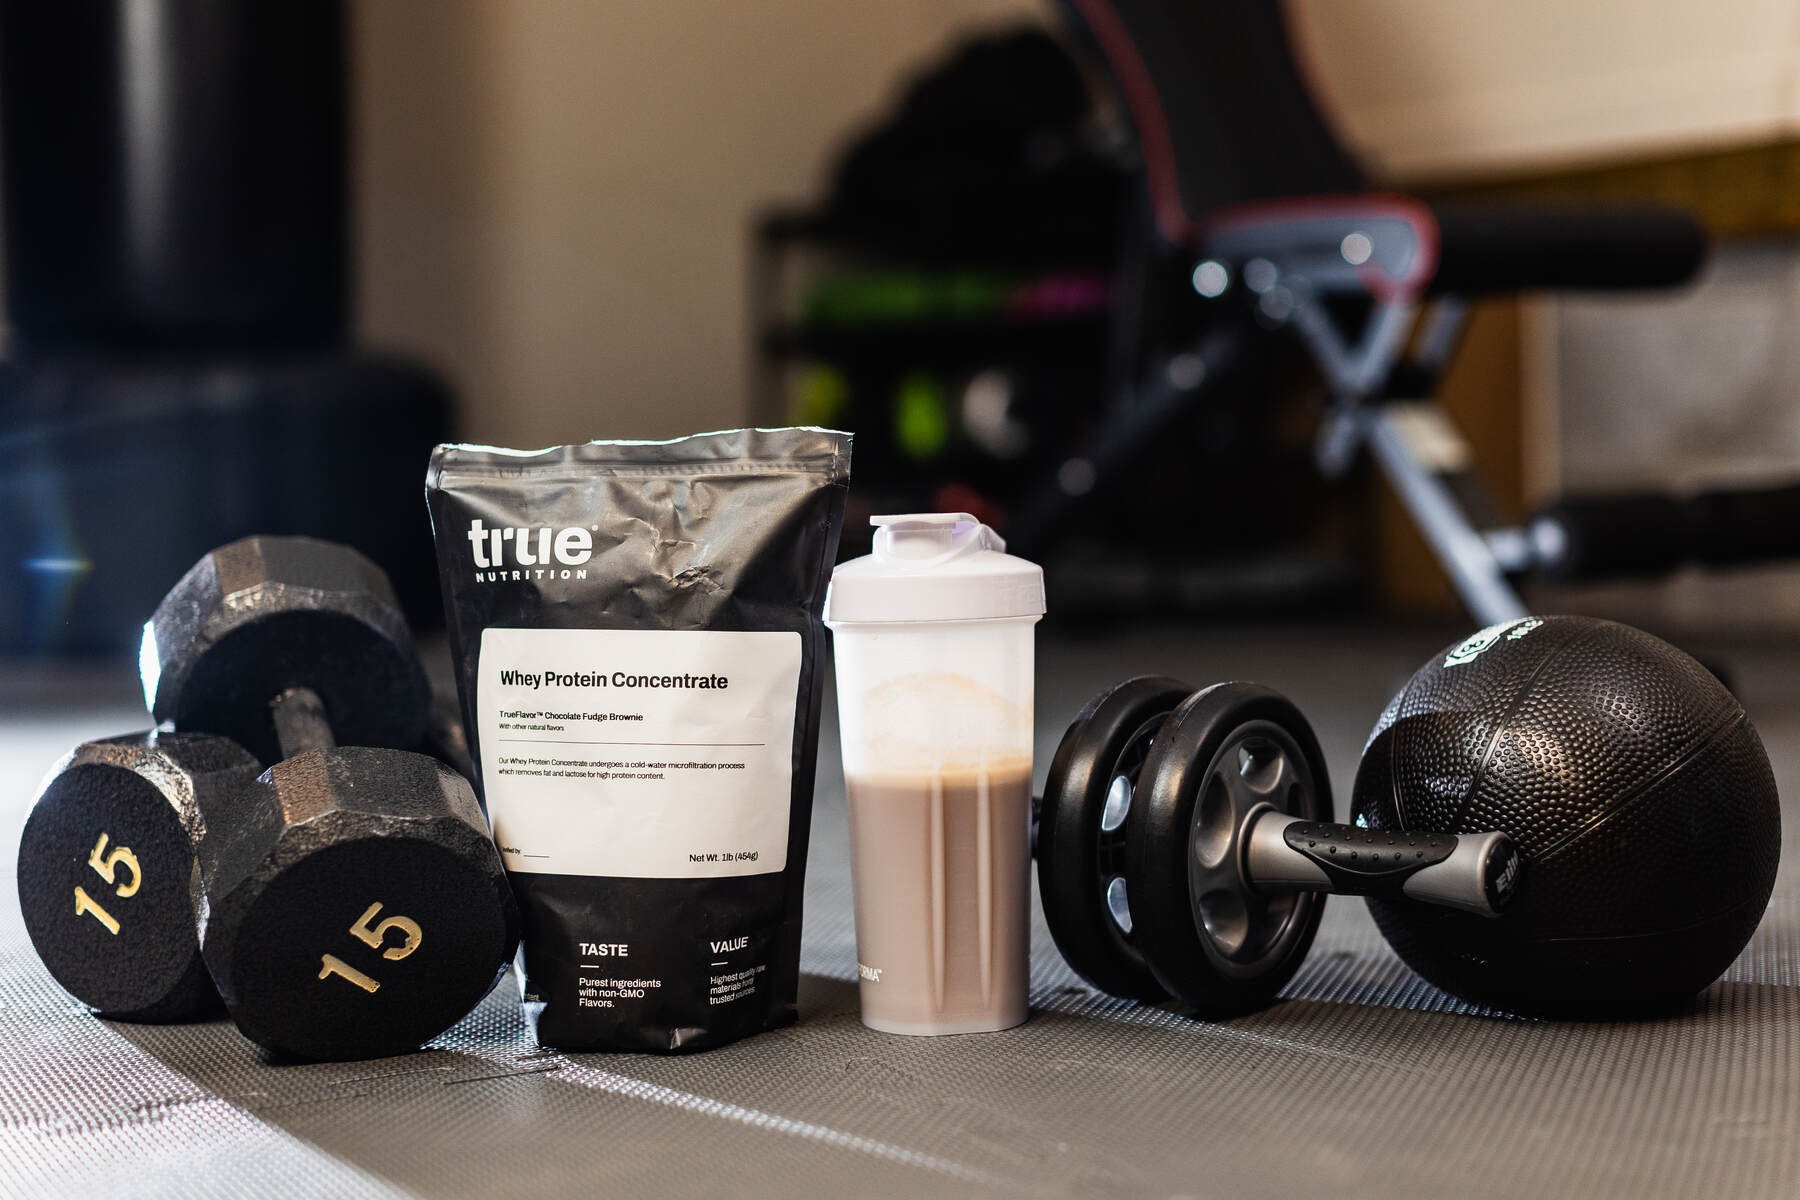 How Long Is Whey Protein Good For?